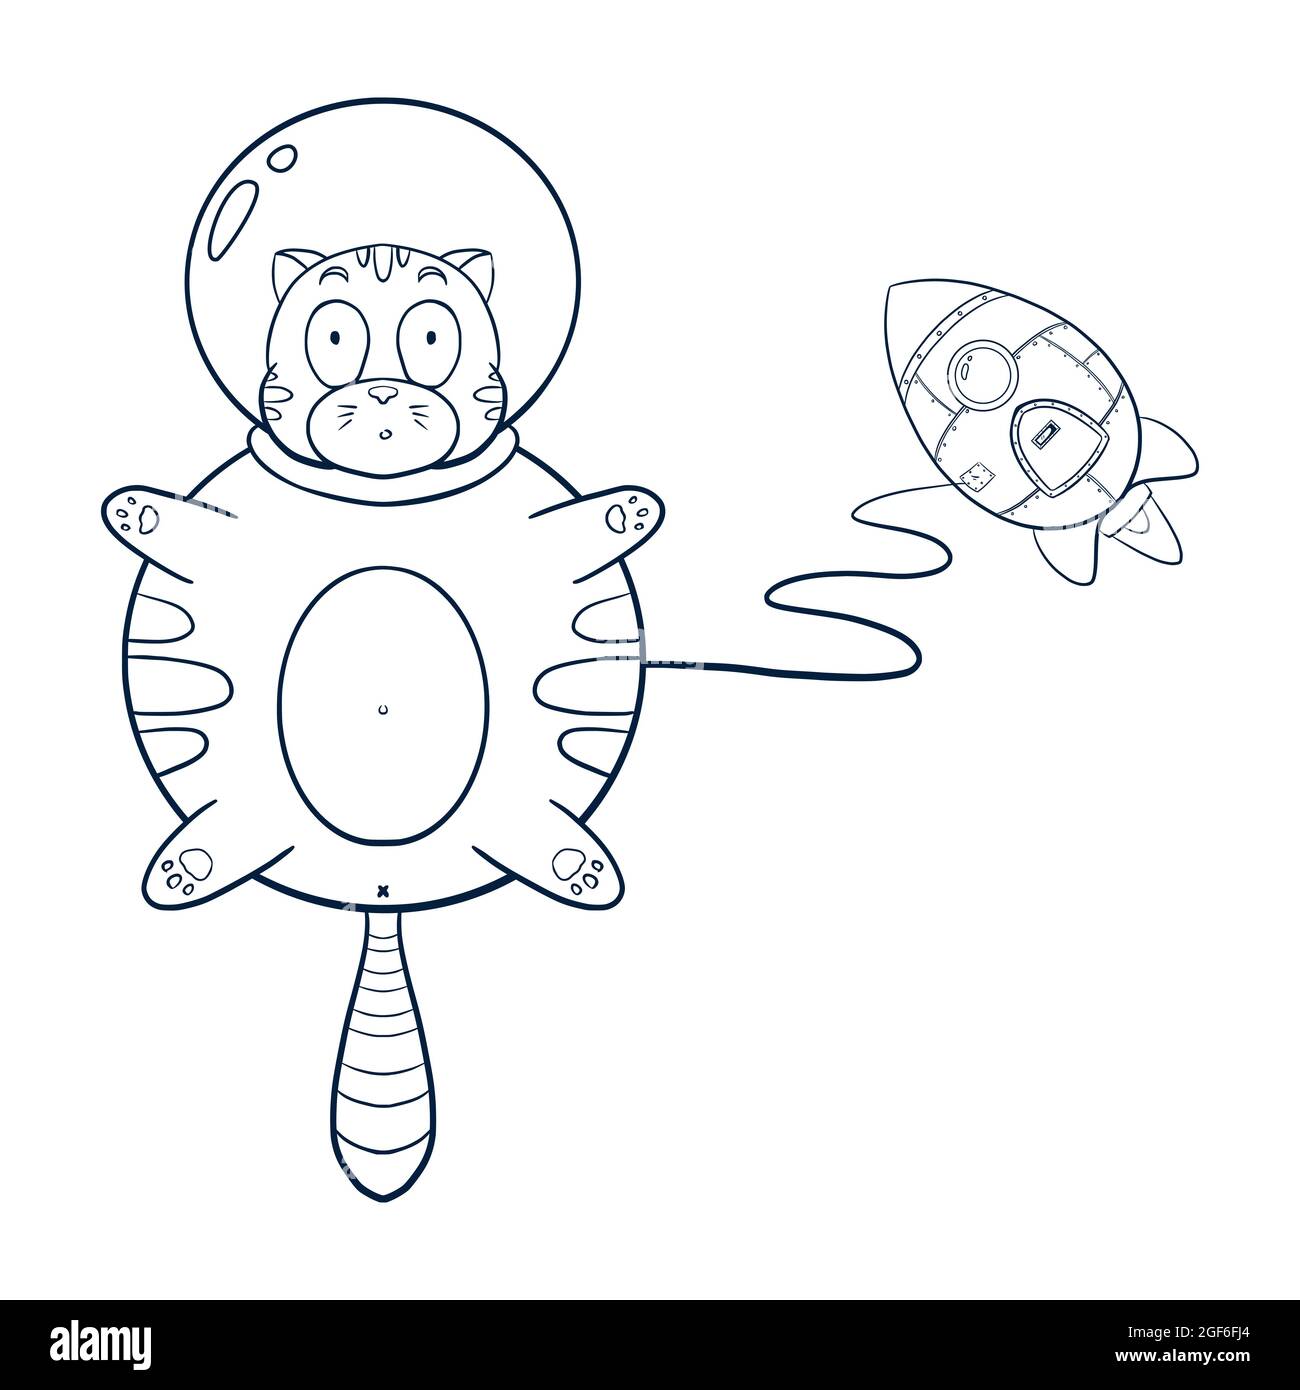 Line Art Cat Astronaut Flying with Rocket Illustration. Funny cosmic animal sketch for logo, kids graphic tees, prints, stickers, coloring book and nursery decor Stock Vector